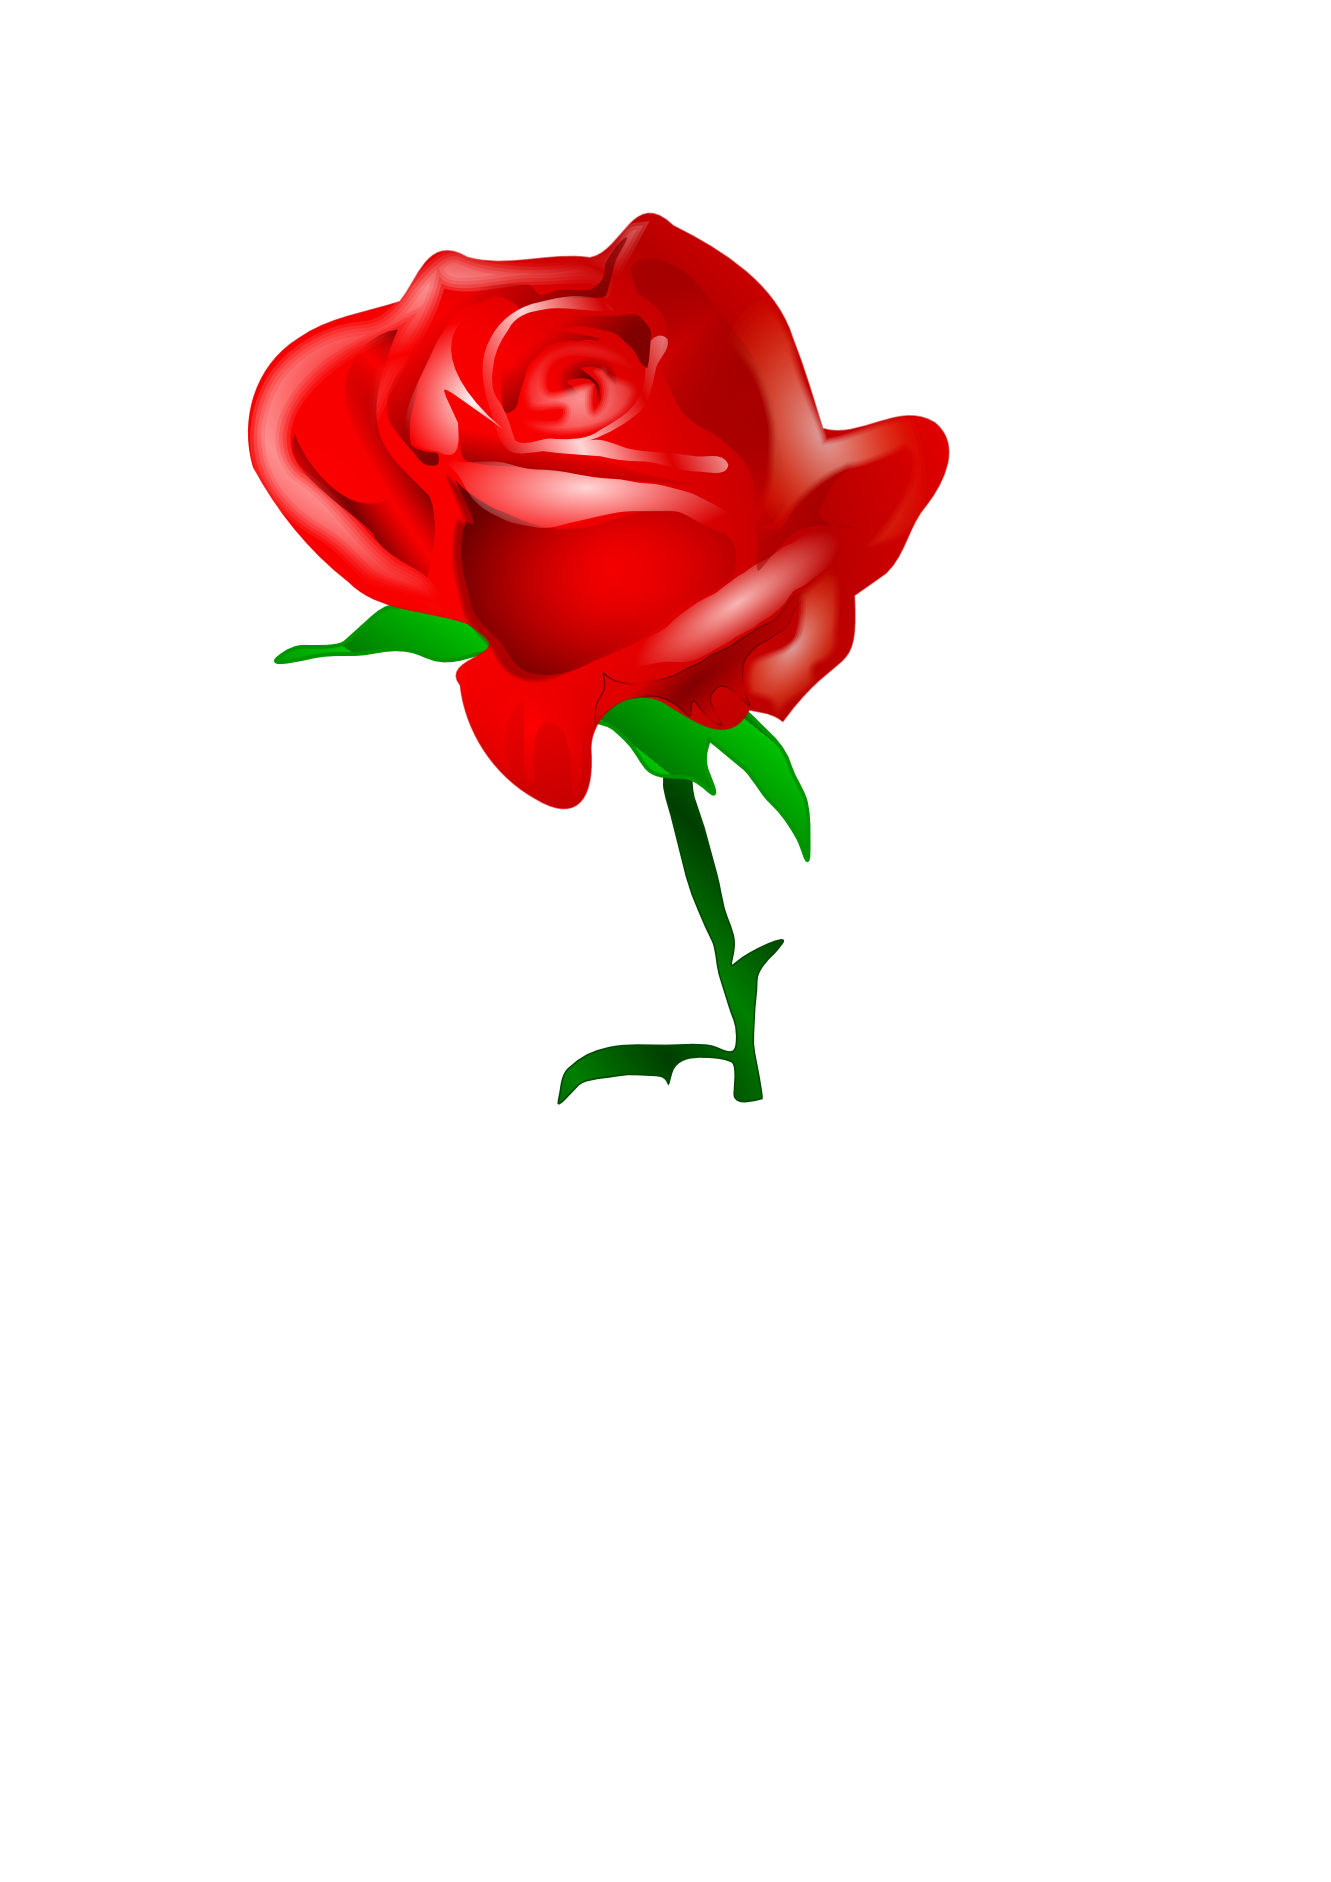 roses clipart images - photo #46